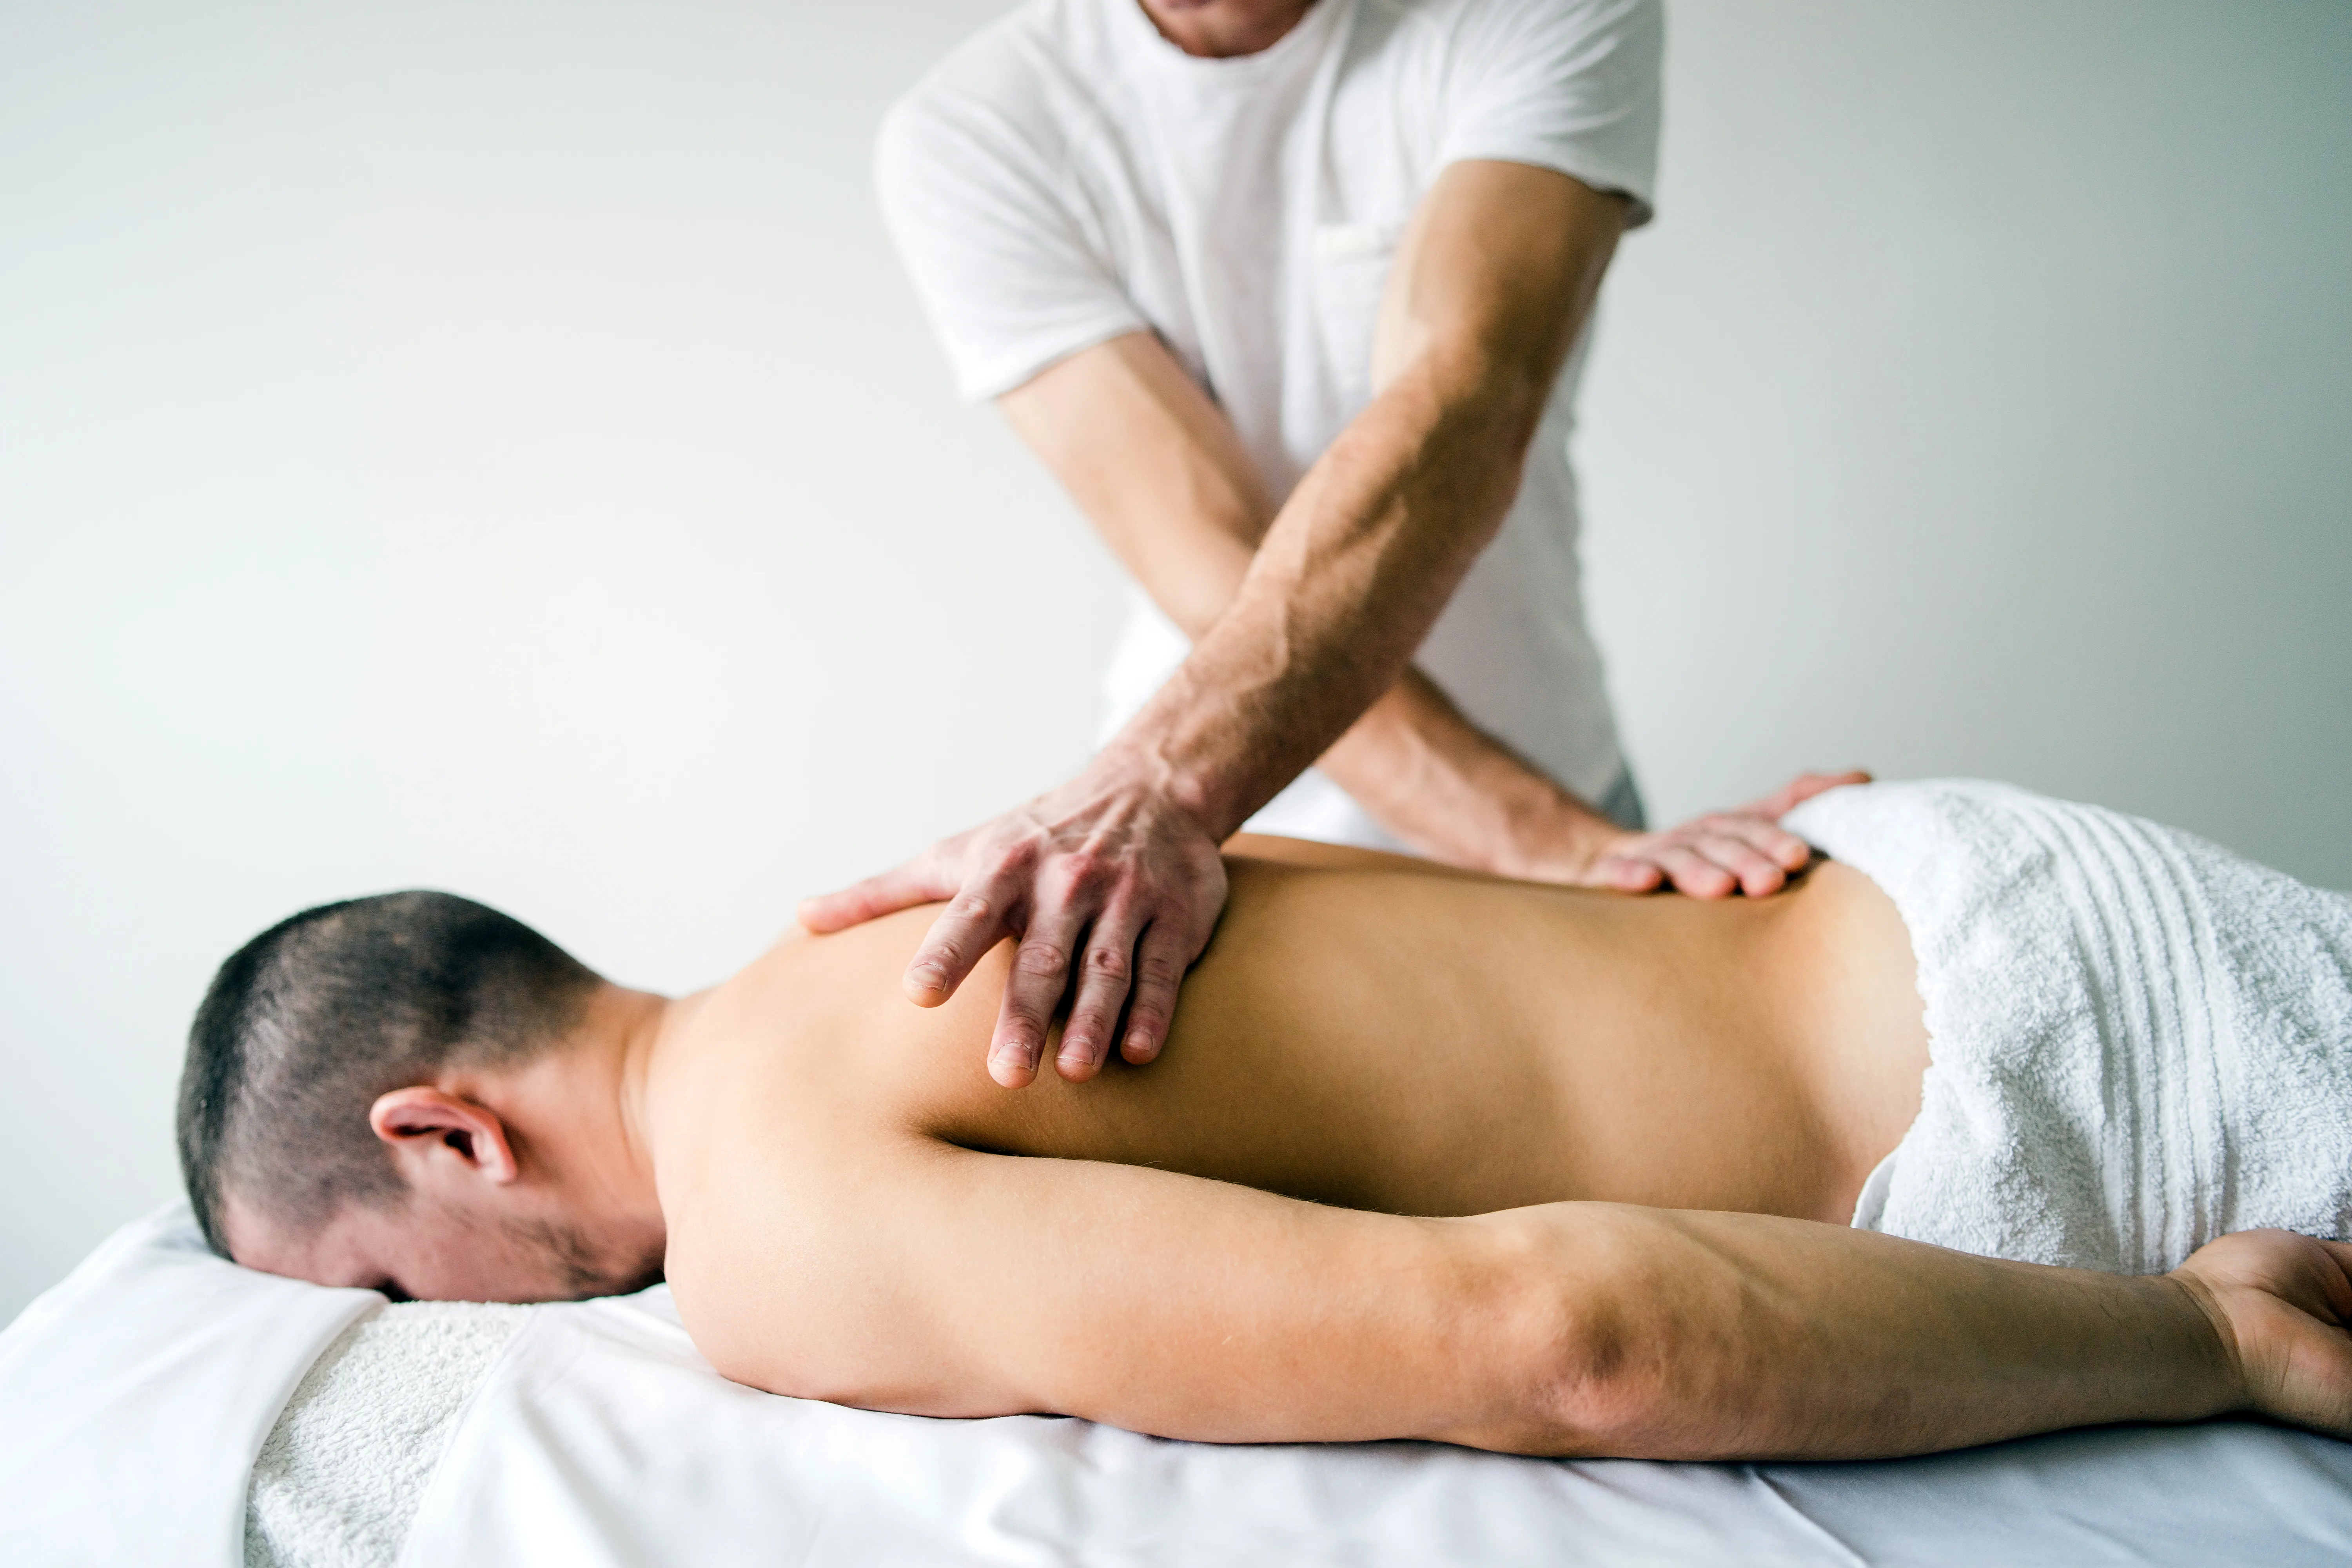 Deep Tissue Male Massage London in United Kingdom, Europe | SPAs,Massages - Rated 1